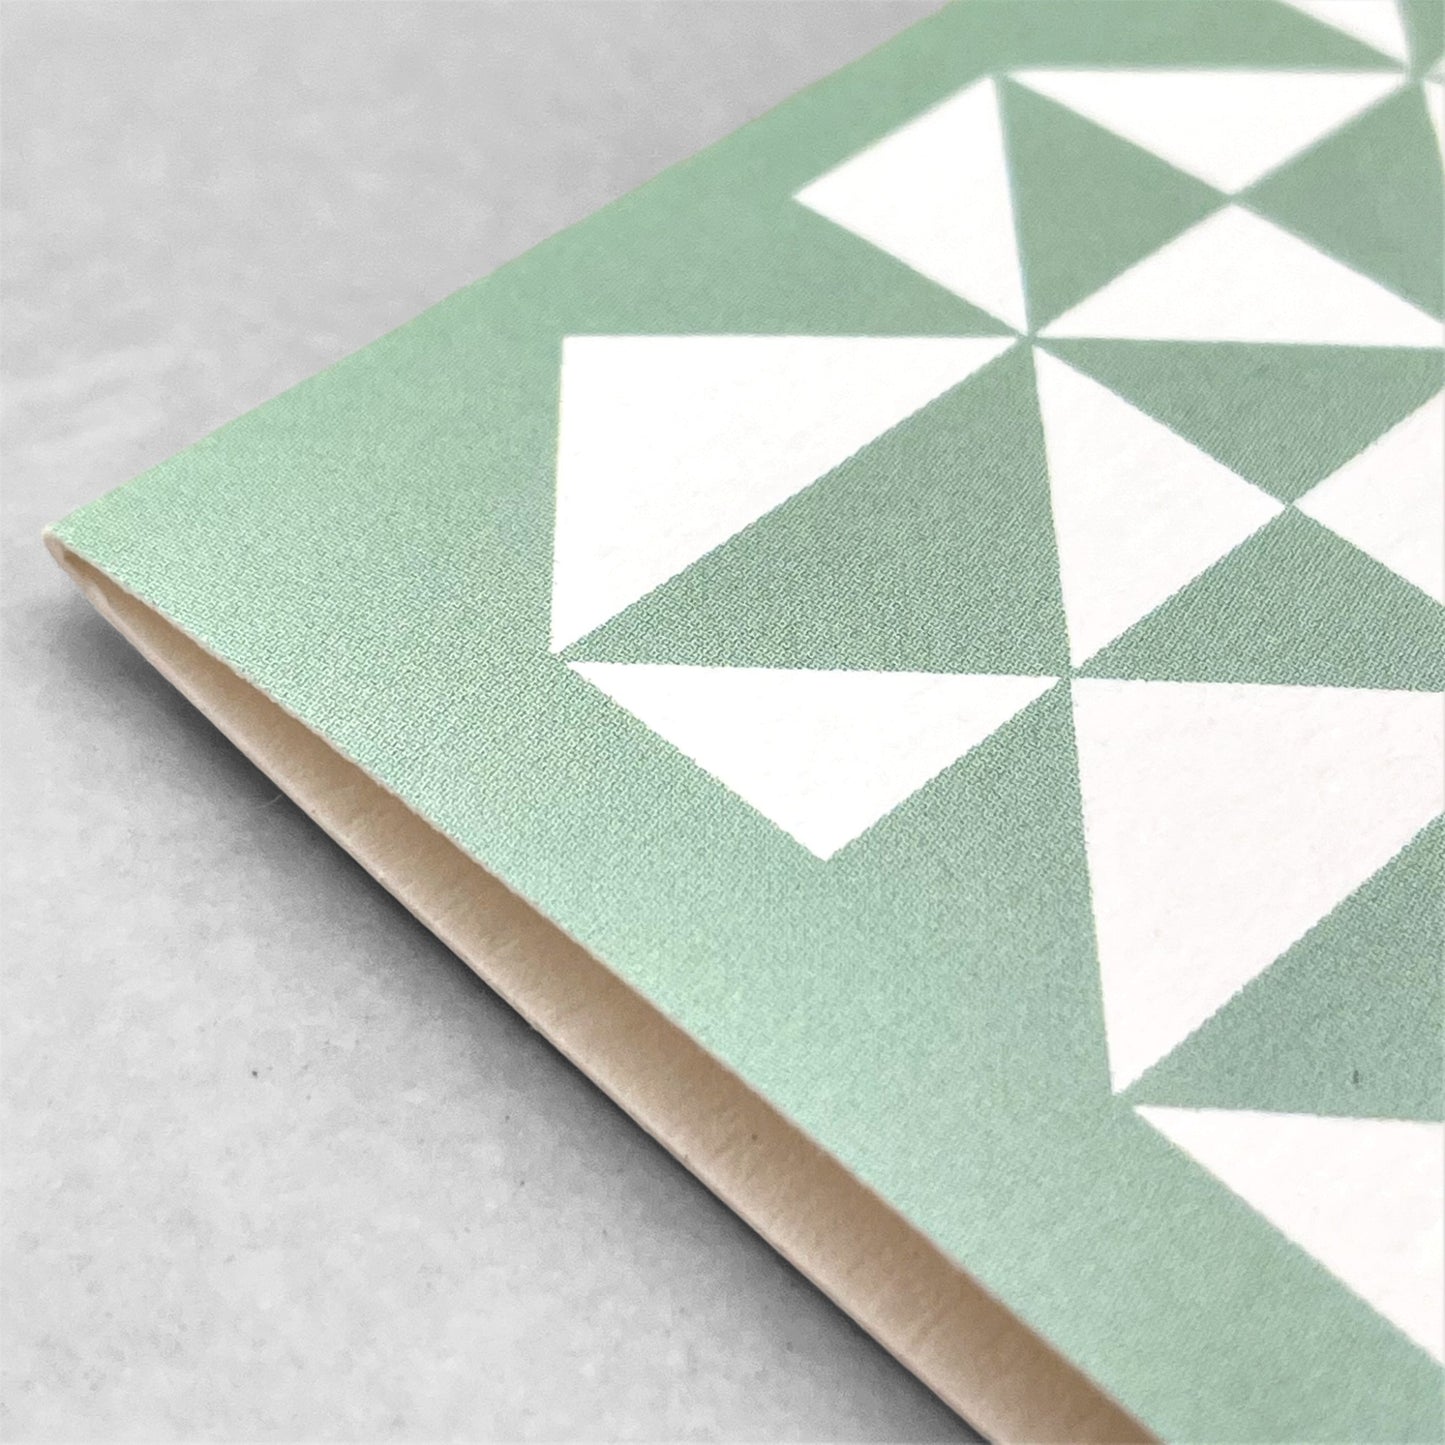 greetings card with abstract triangular pattern in white and aquamarine by Ola Studio